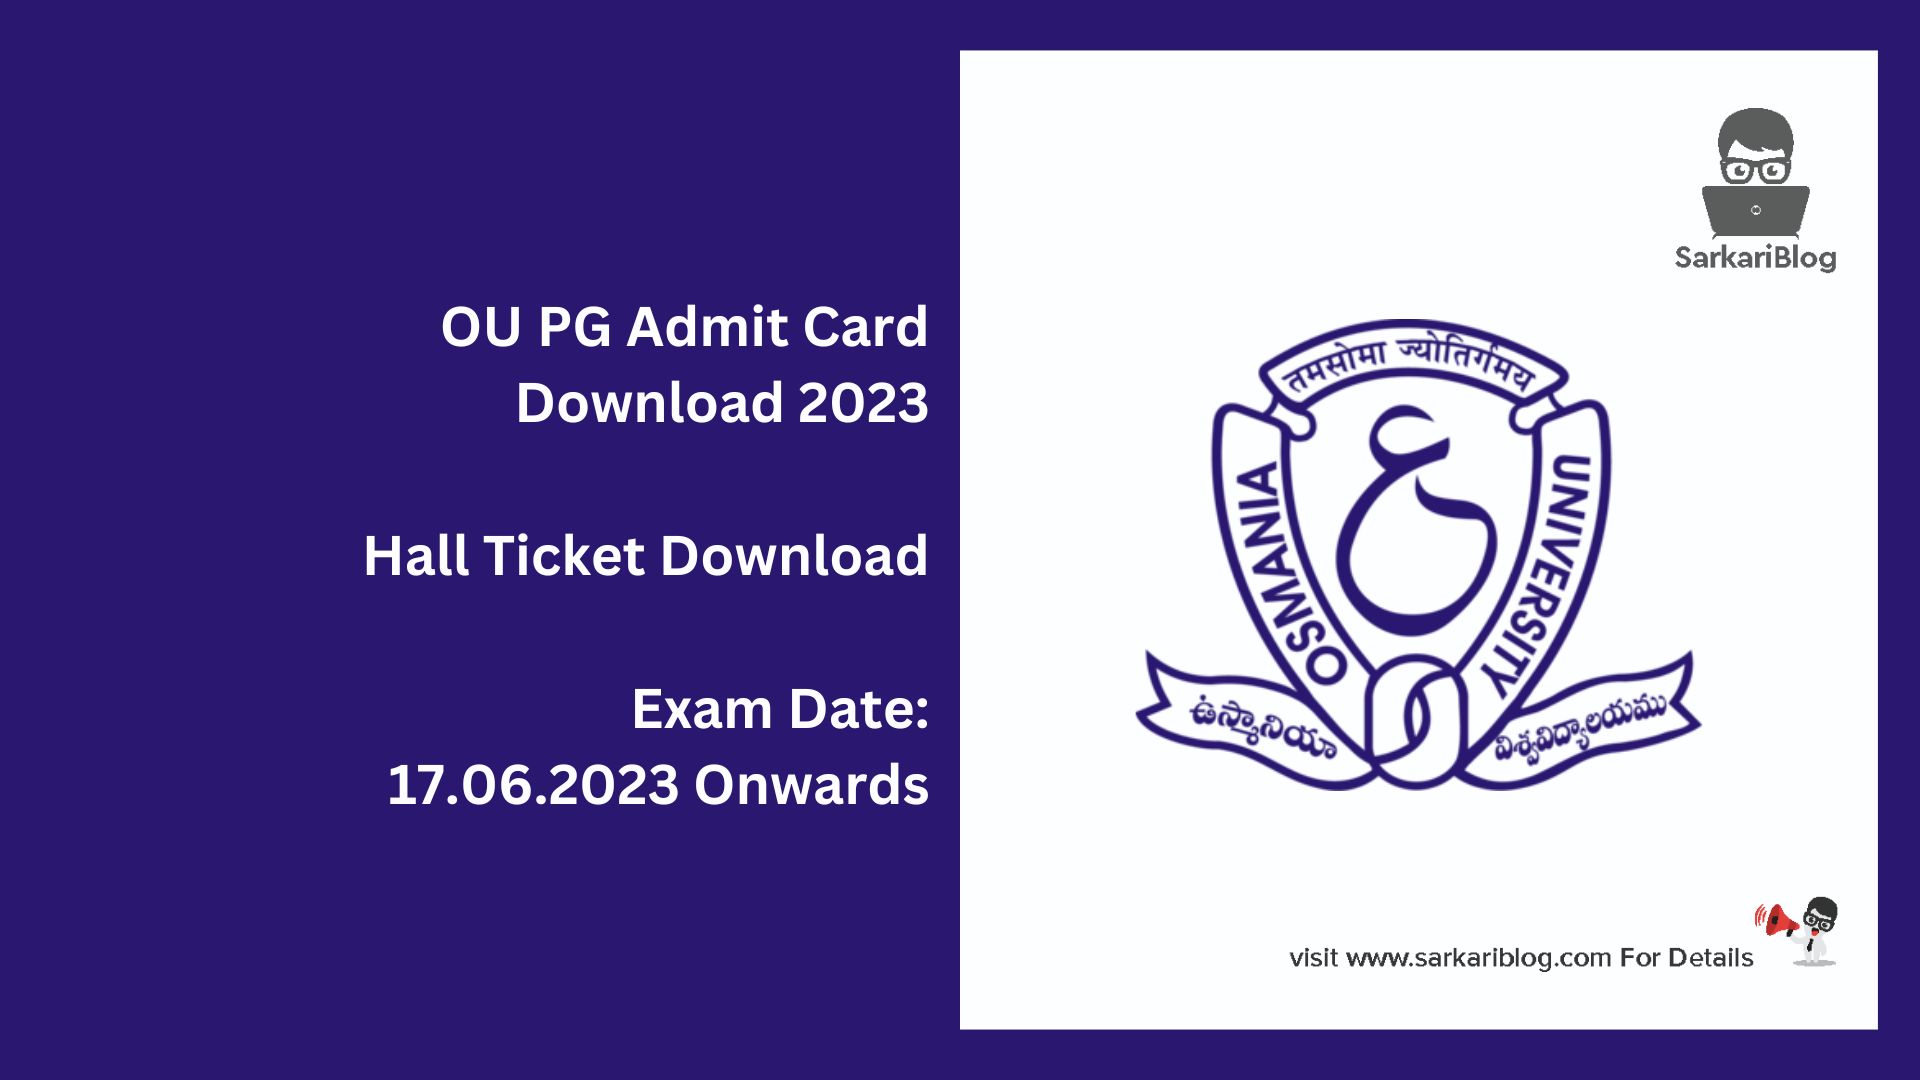 OU PG Admit Card Download 2023